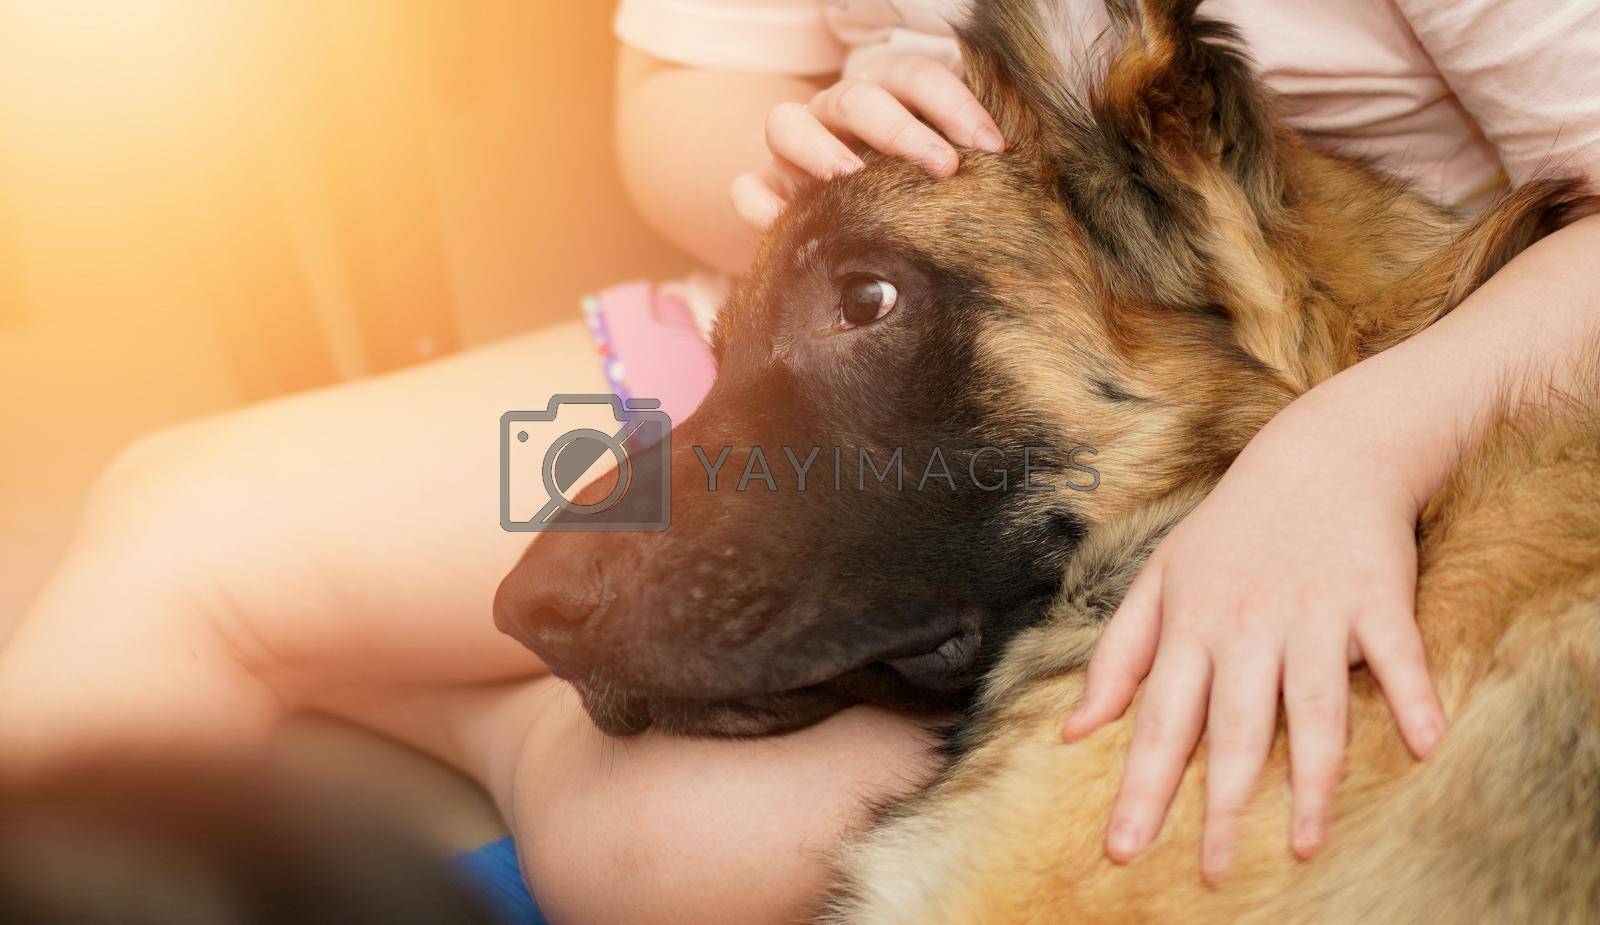 Royalty free image of dog head with owner togetherness sitting with care and smiling by VacharapongW